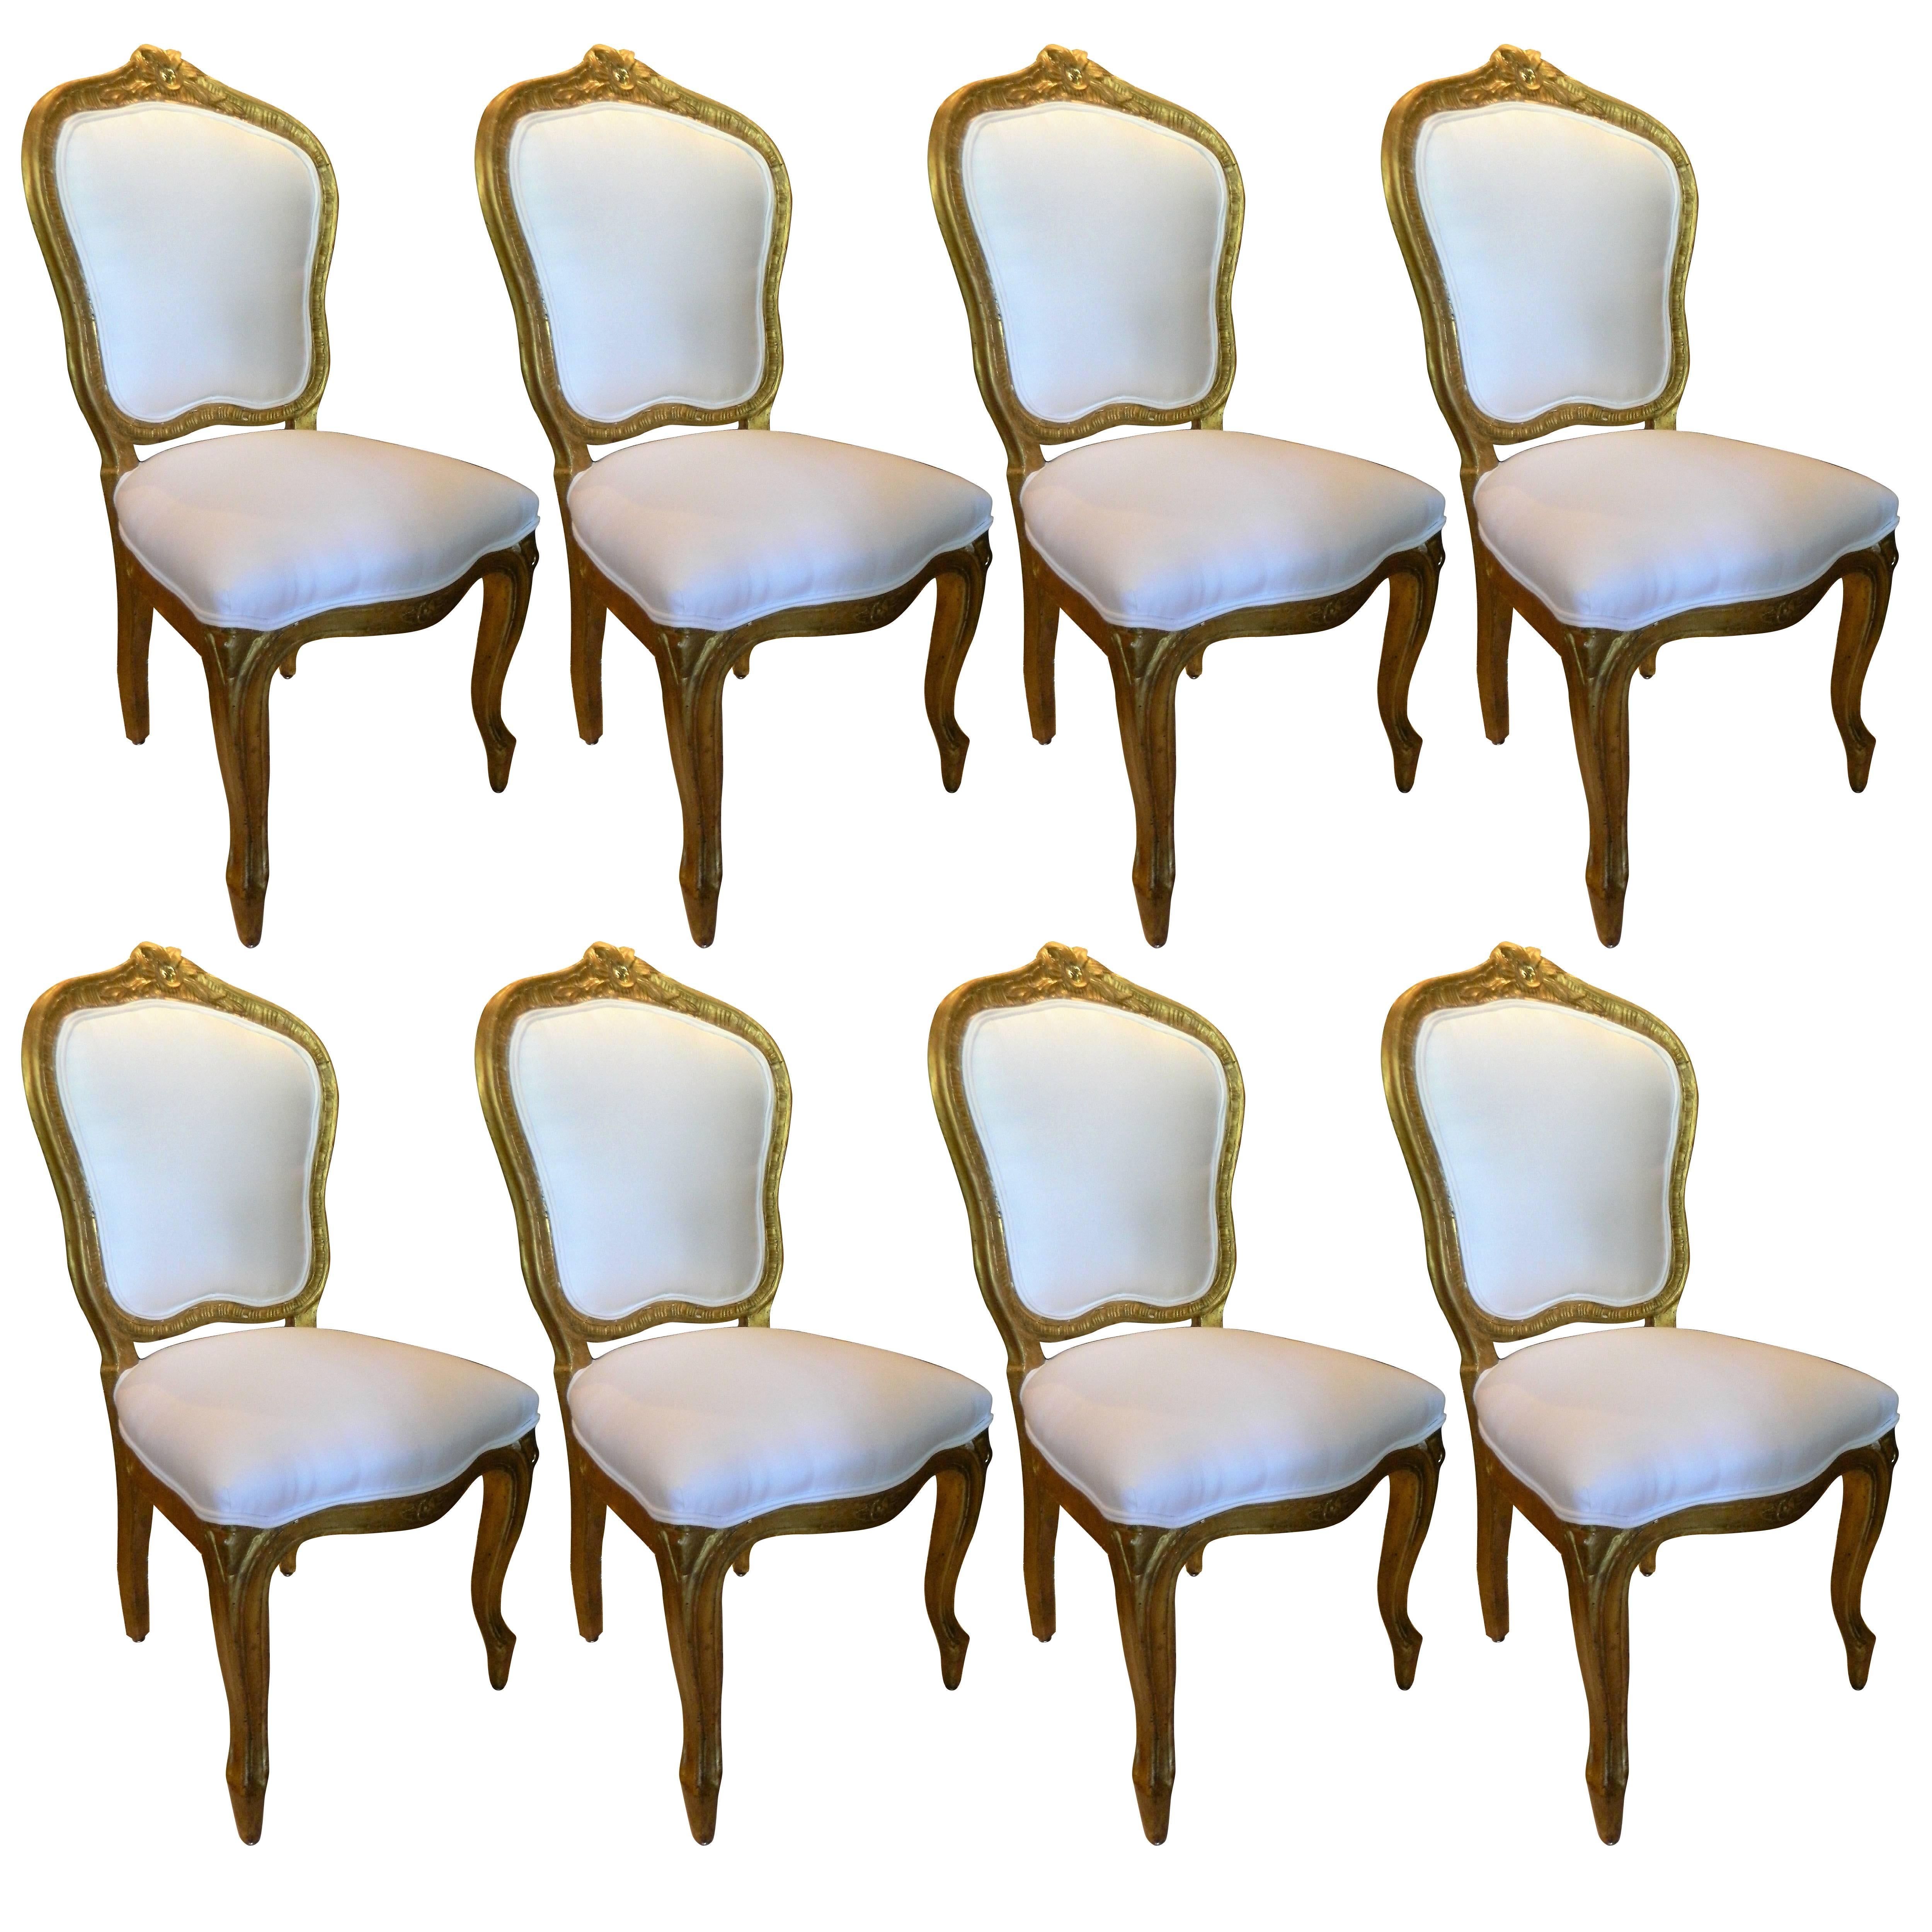 Set of Eight Louis XV Style Giltwood Side Chairs, Early 19th Century